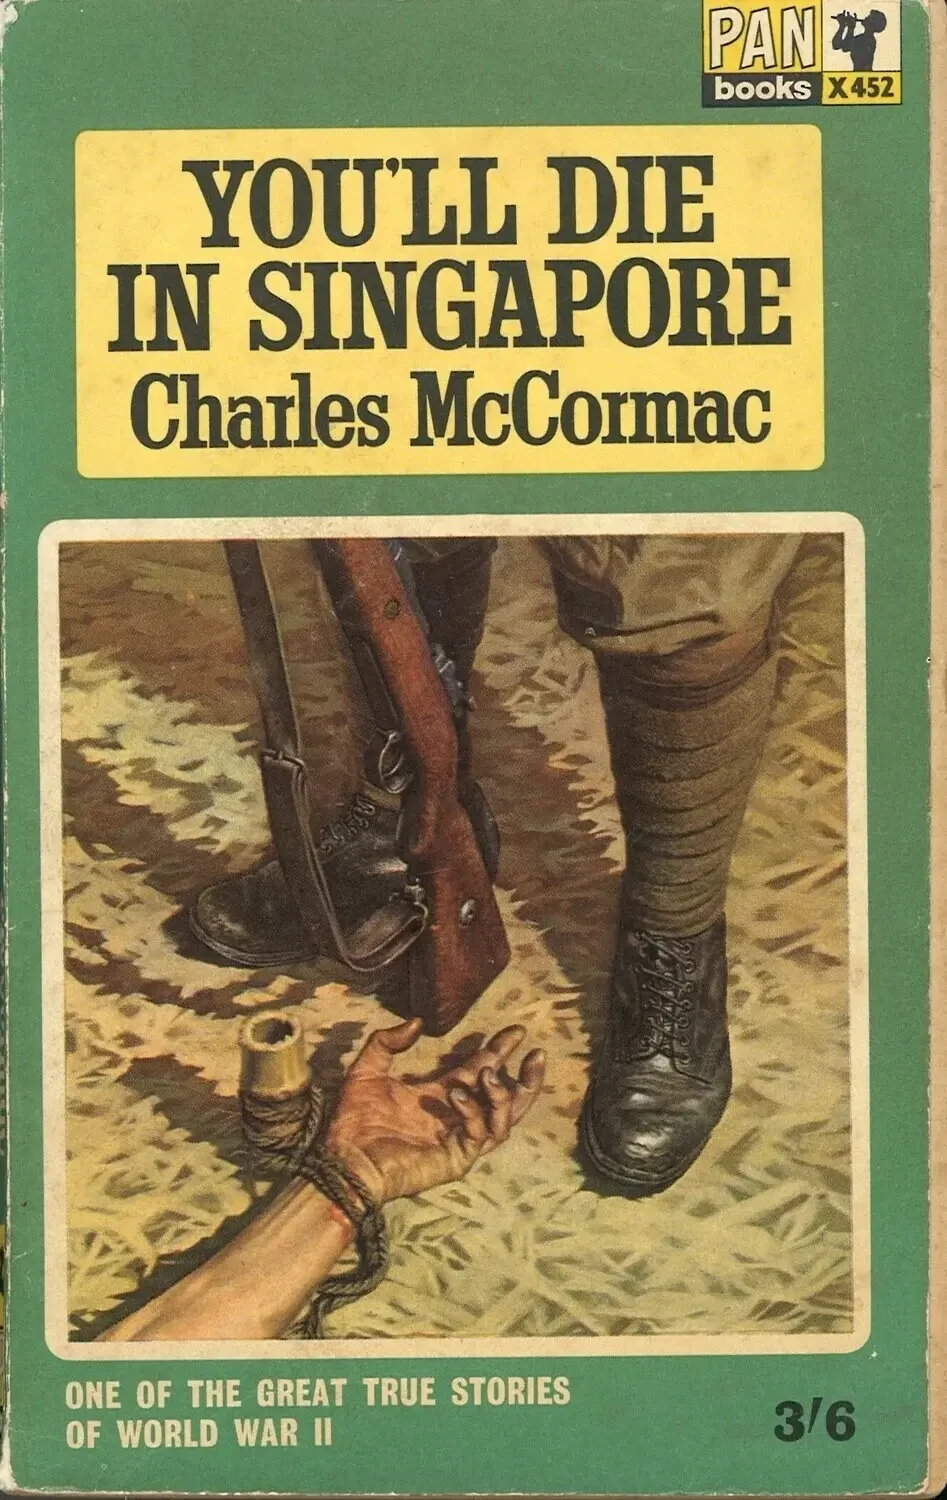 You'll Die in Singapore by Charles McCormac